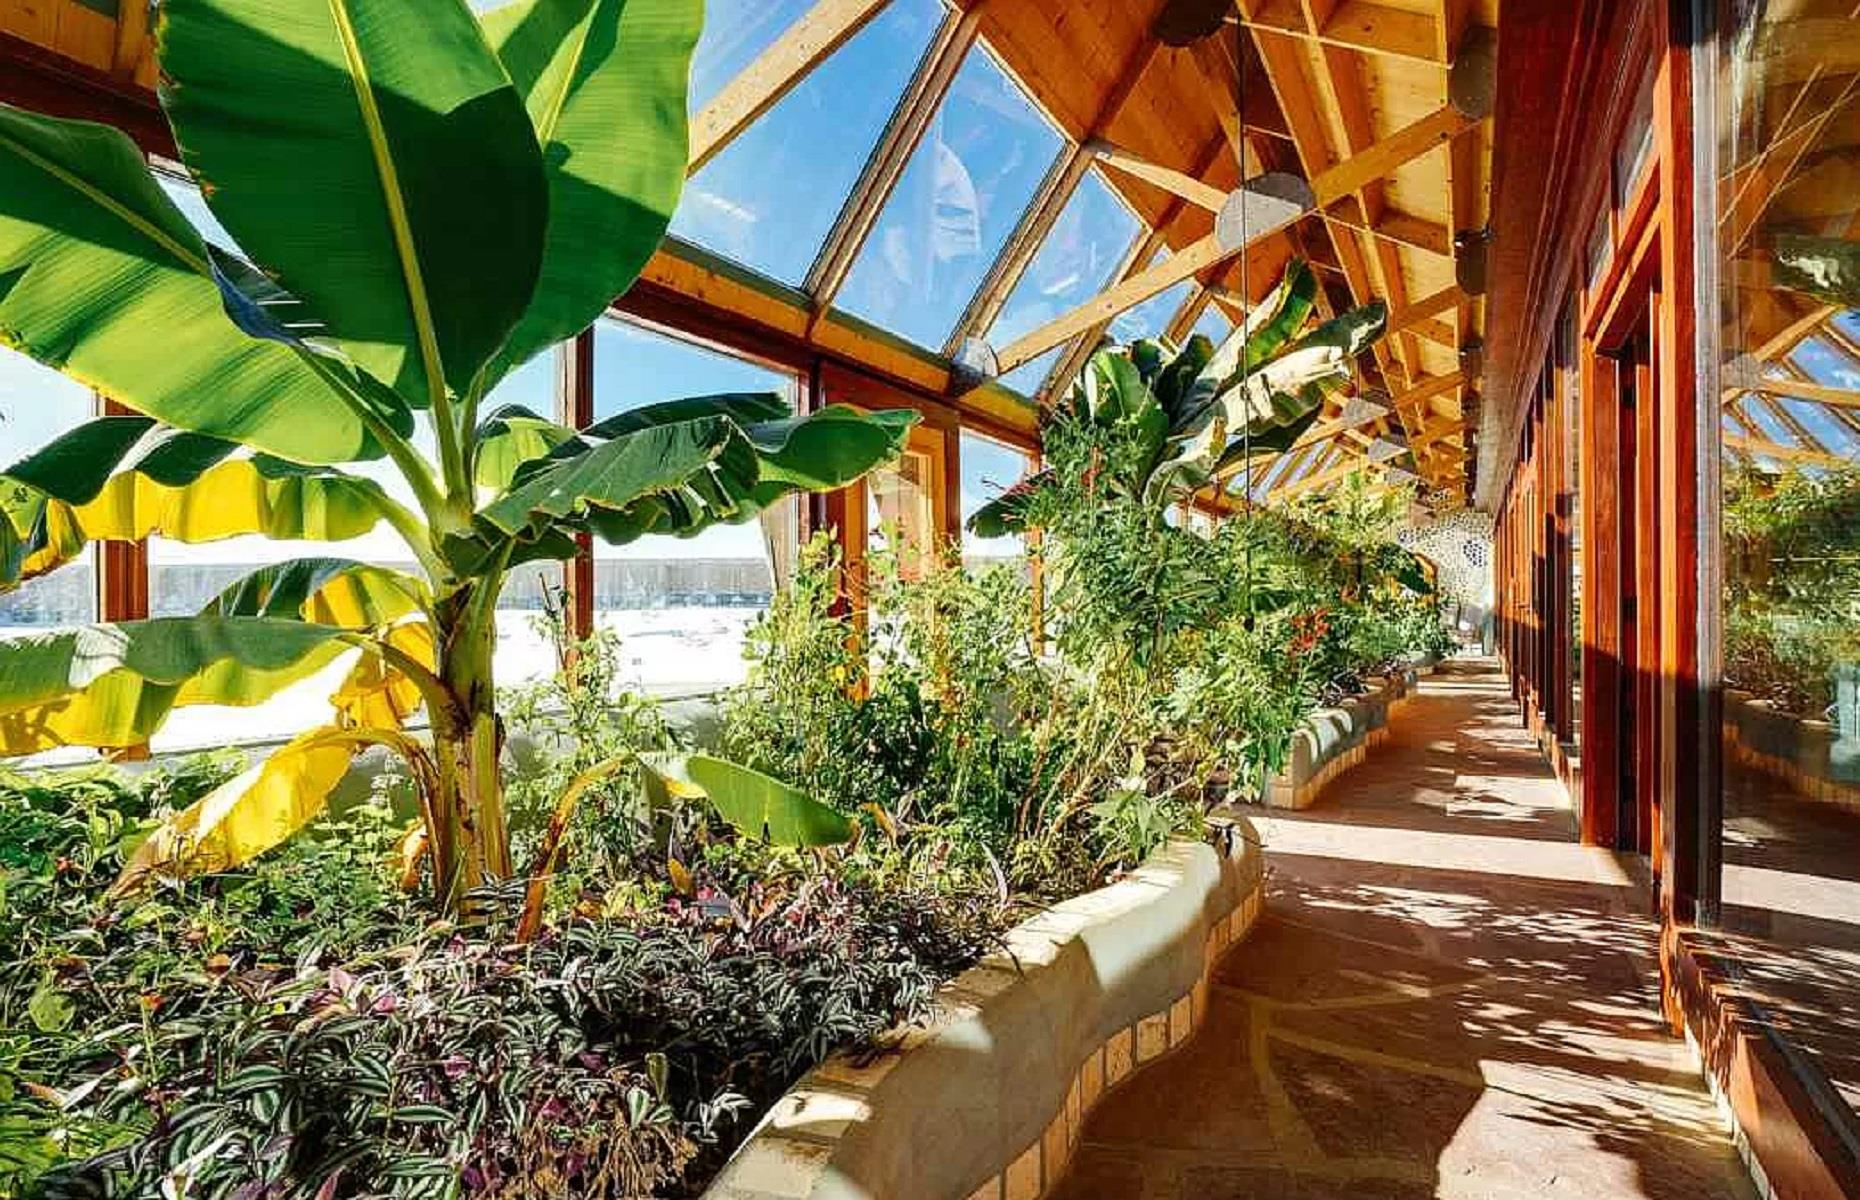 <p>Off-grid living at its finest, the Truchas Earthship was constructed from top-quality materials, inside and out, making it eco-friendly, efficient, and top-of-the-line. Spanning 2,600 square feet, the interior benefits from a huge atrium garden, which runs the length of the building. Filled with mature plants that are fed by the home's gray water system, this indoor oasis was designed for the green-thumbed.</p>